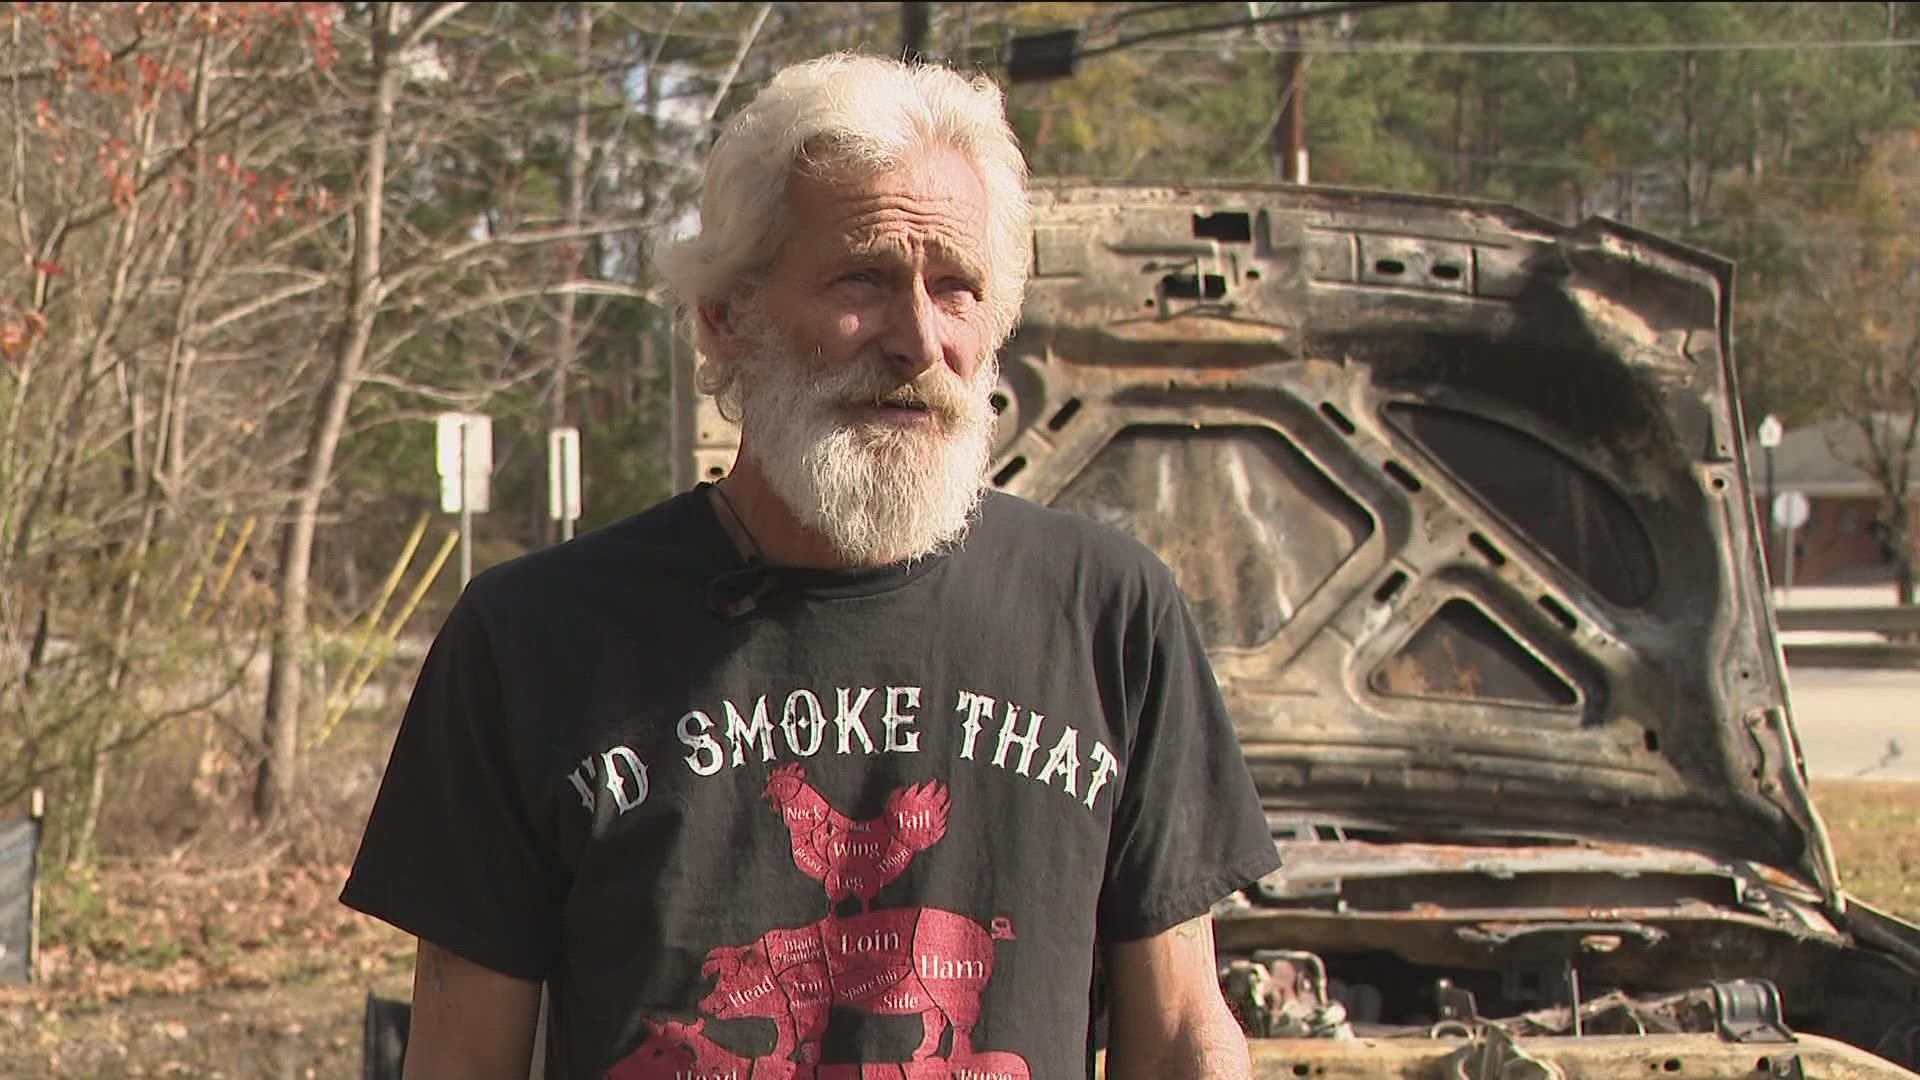 The Paulding County man said squatters torched his truck.